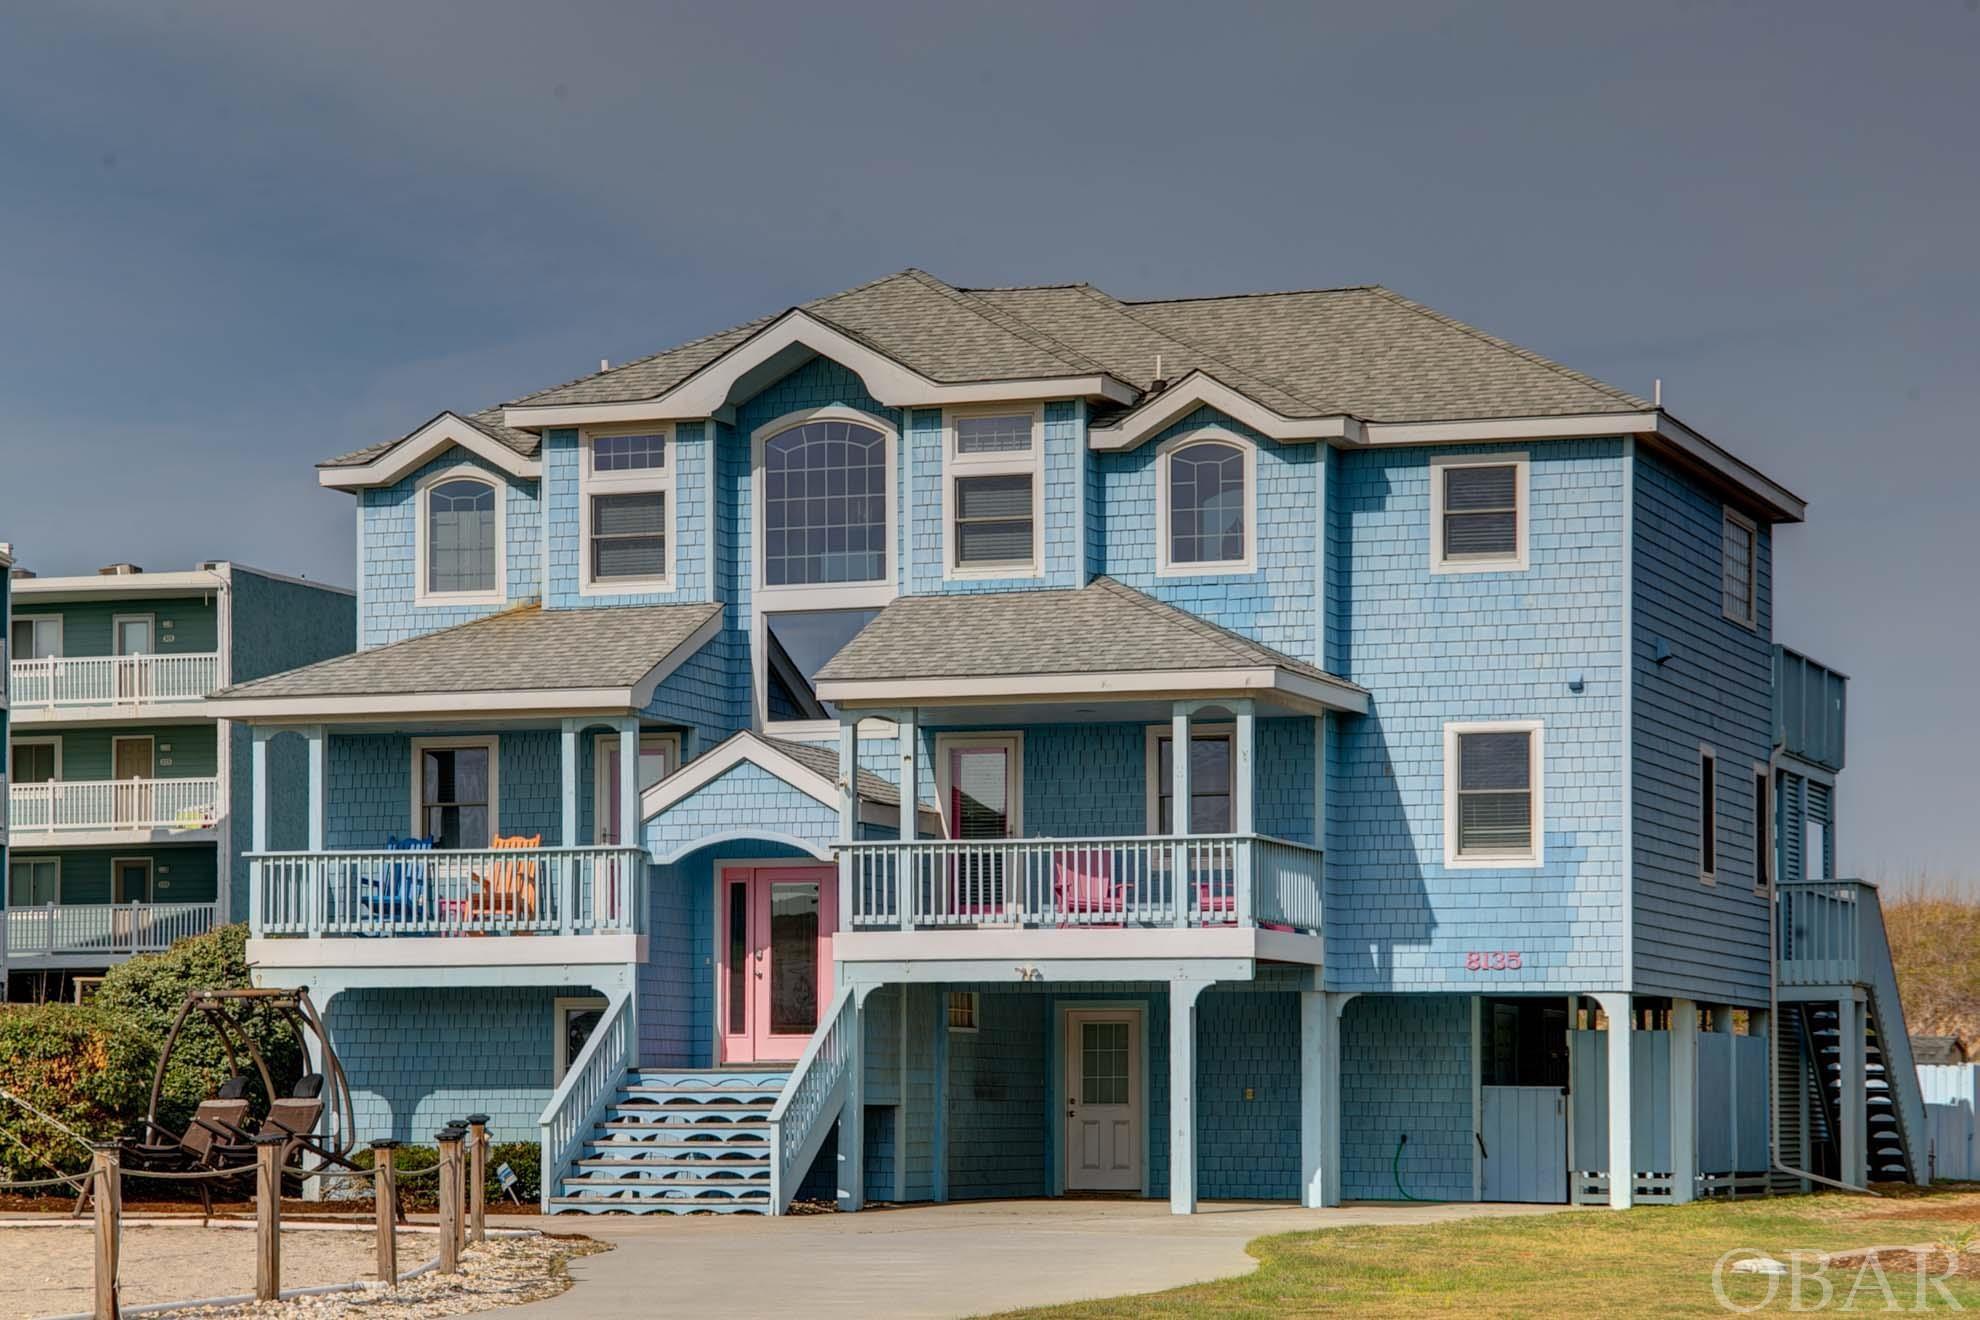 8135 Old Oregon Inlet Road, Nags Head, NC 27959, 8 Bedrooms Bedrooms, ,6 BathroomsBathrooms,Residential,For sale,Old Oregon Inlet Road,124318